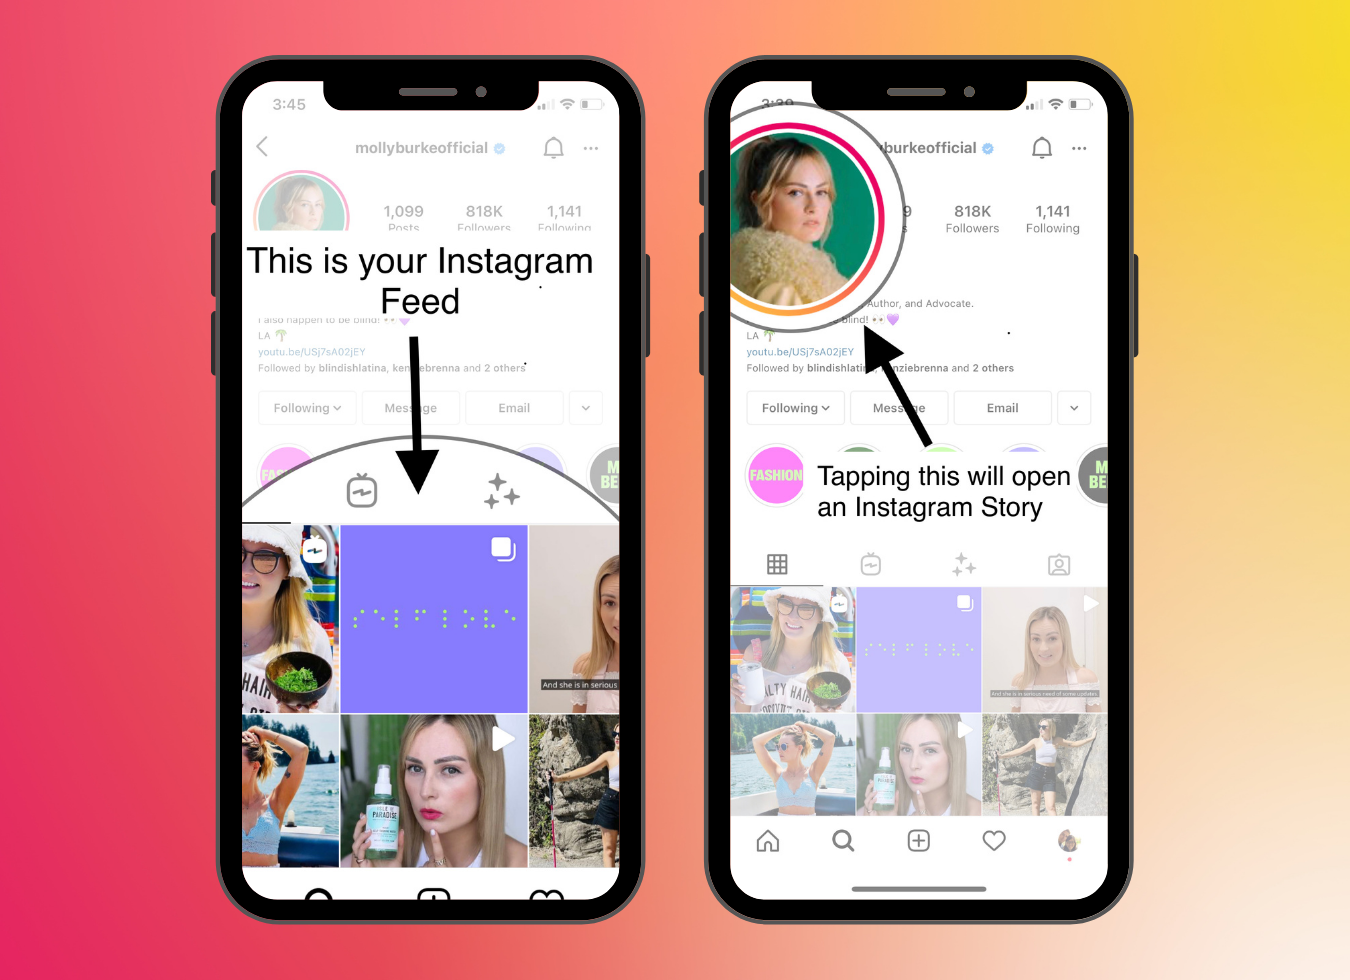 The Instagram feed is the grid of images that you see when viewing a user's profile. In the top left corner of a Profile is a the user's profile image. Clicking this opens an Instagram Story. 